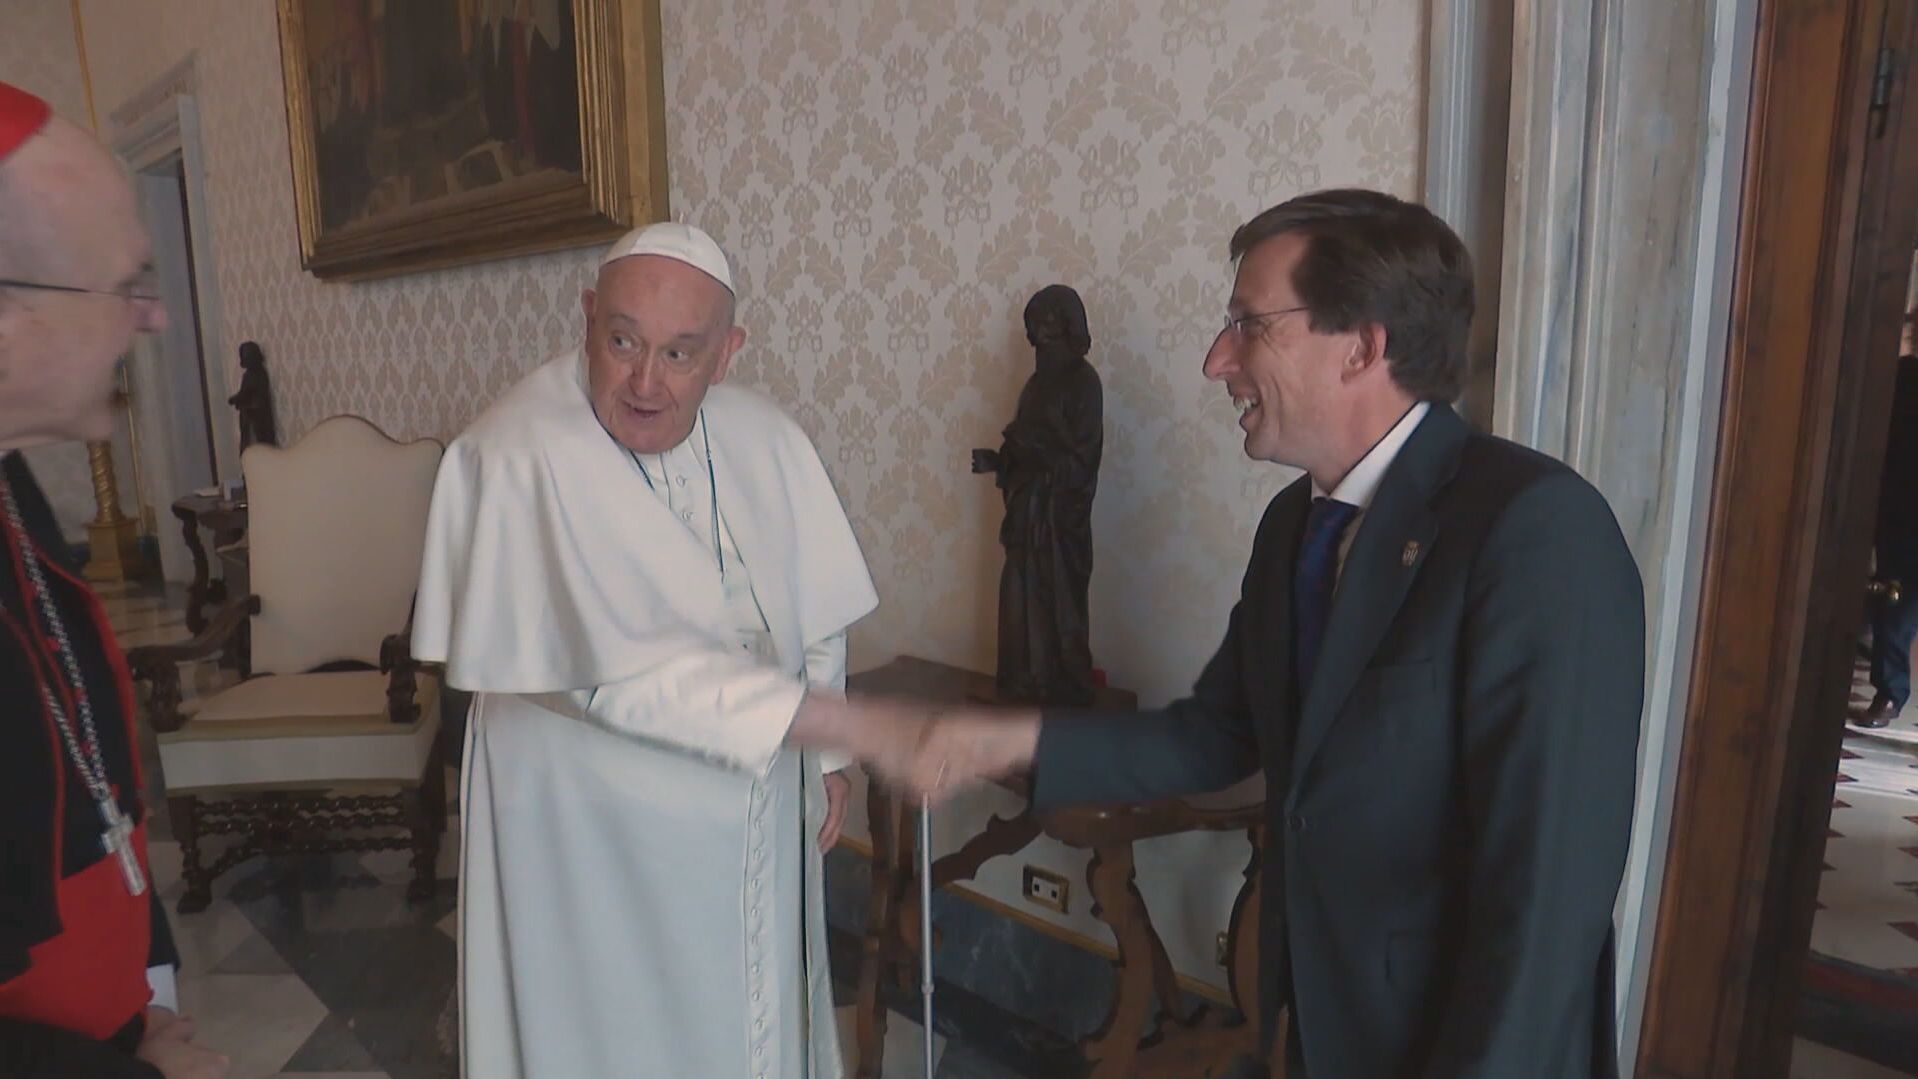 The pope’s ‘trolling’ to Almeida: “Ah, the inheritor to the nice Manuela”